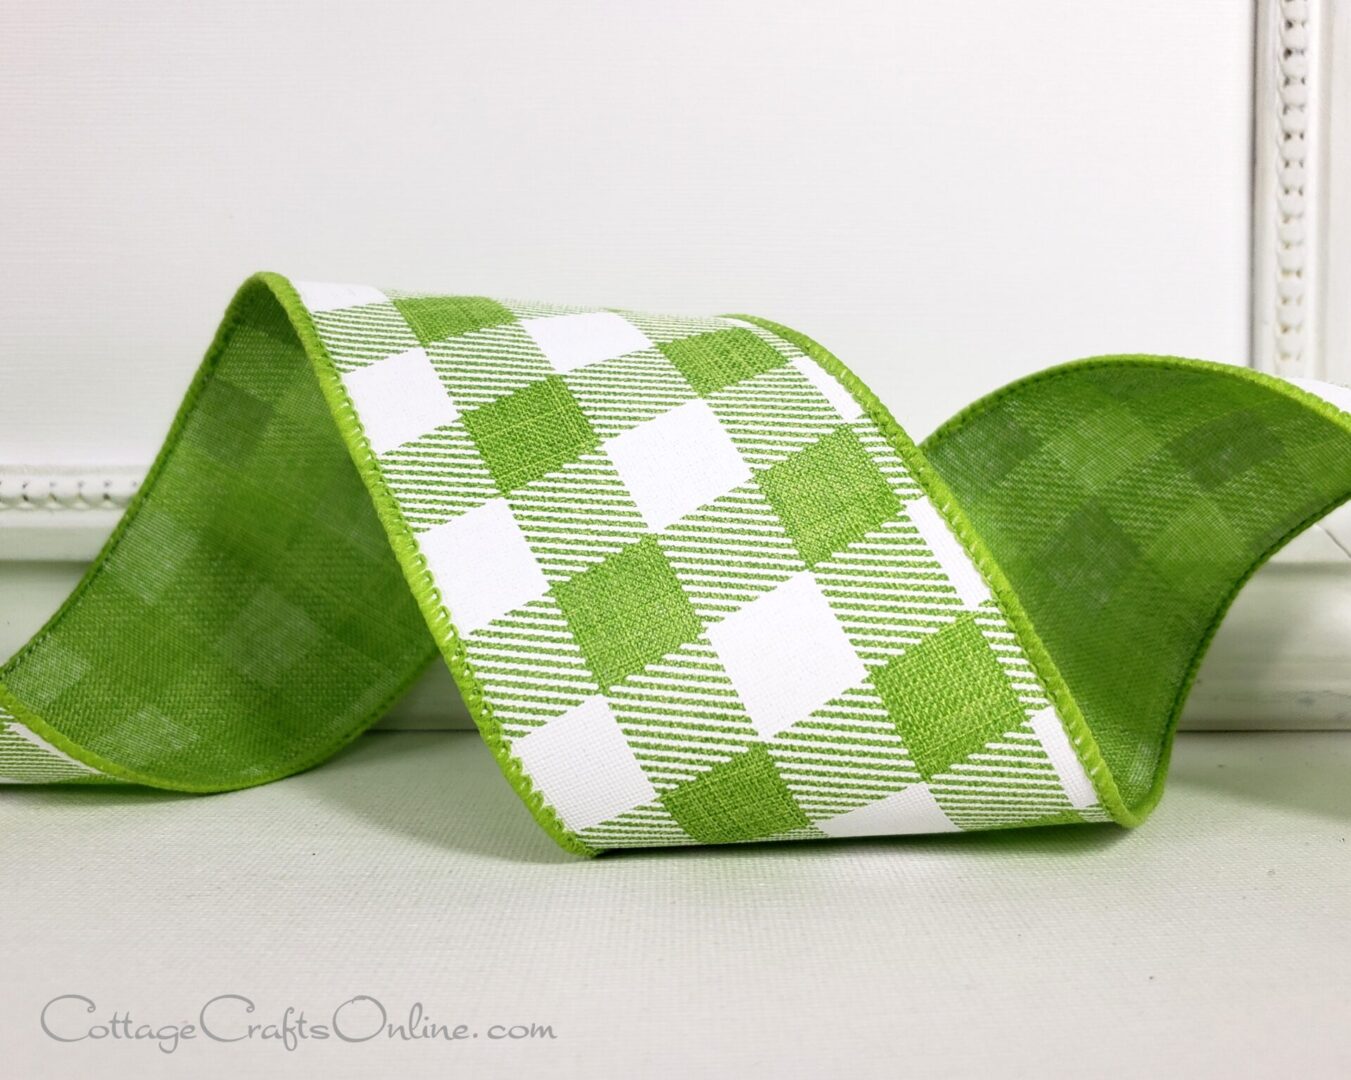 A green and white plaid ribbon sitting on top of a table.